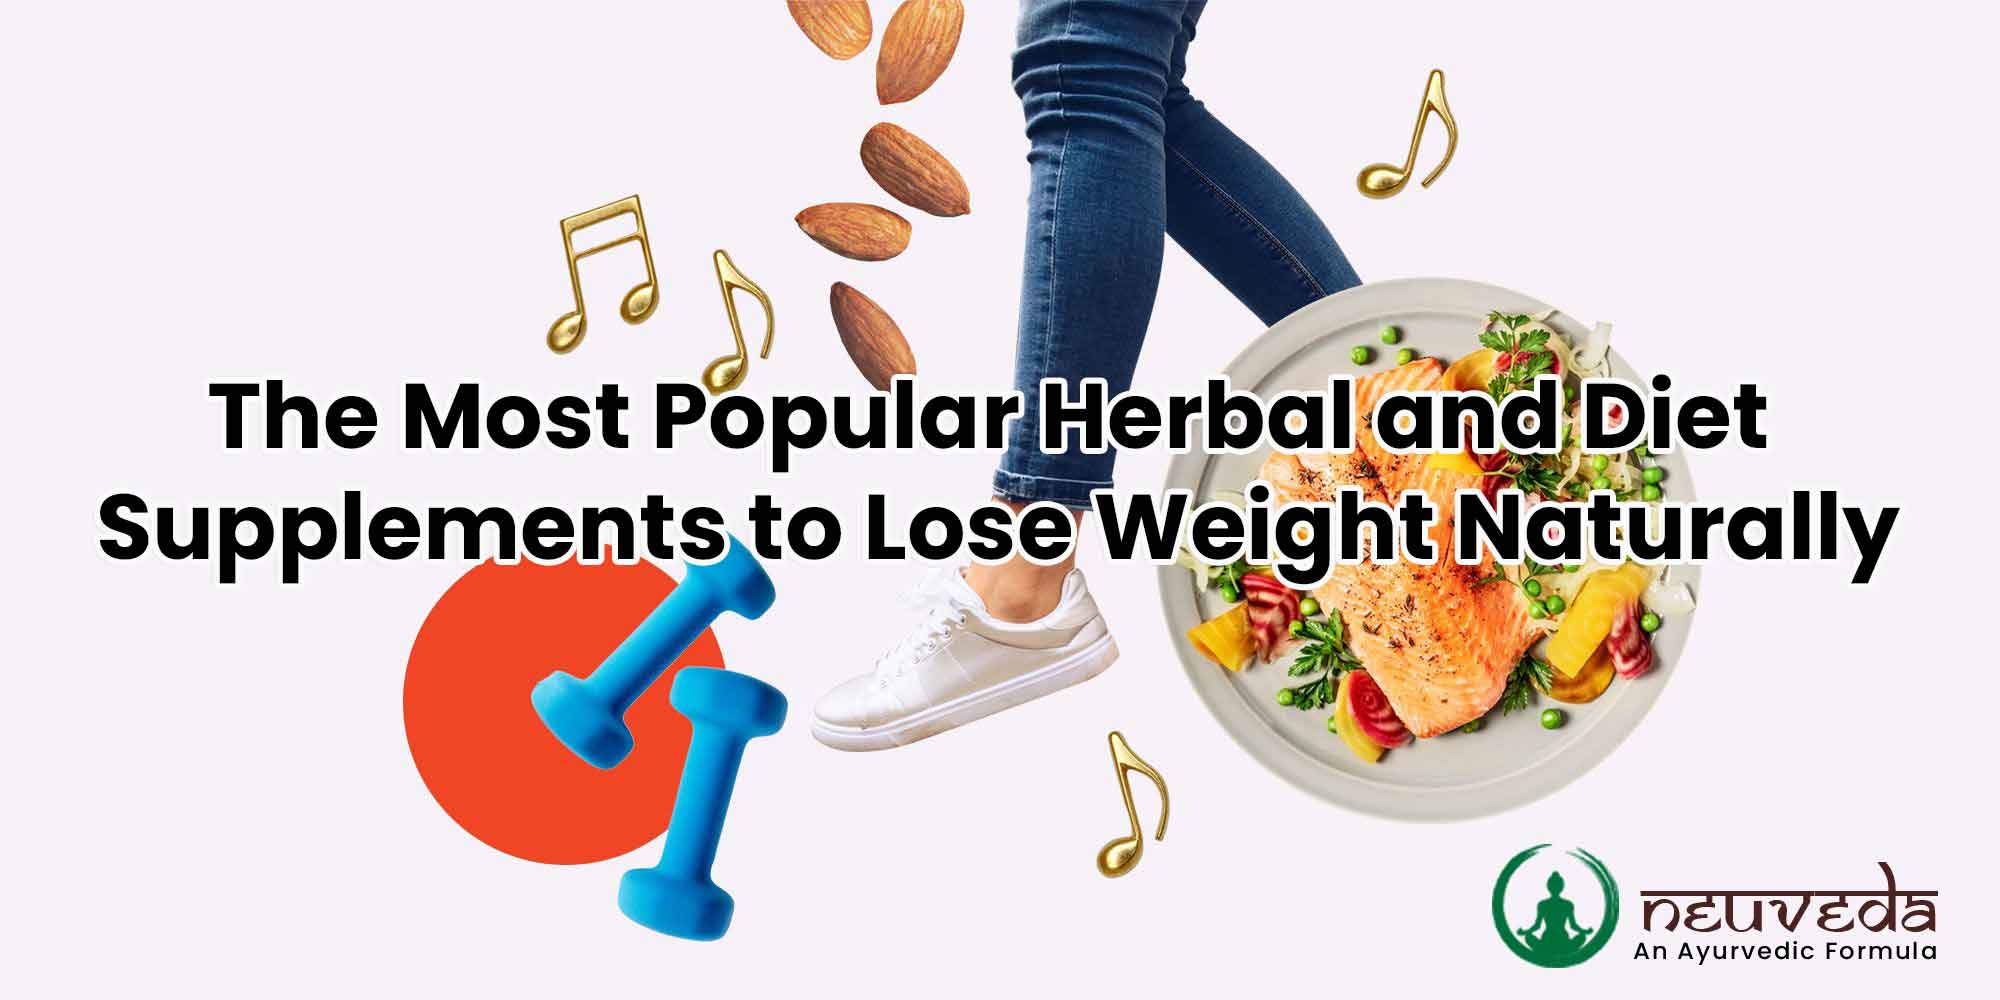 The Most Popular Herbal And Diet Supplements To Lose Weight Naturally